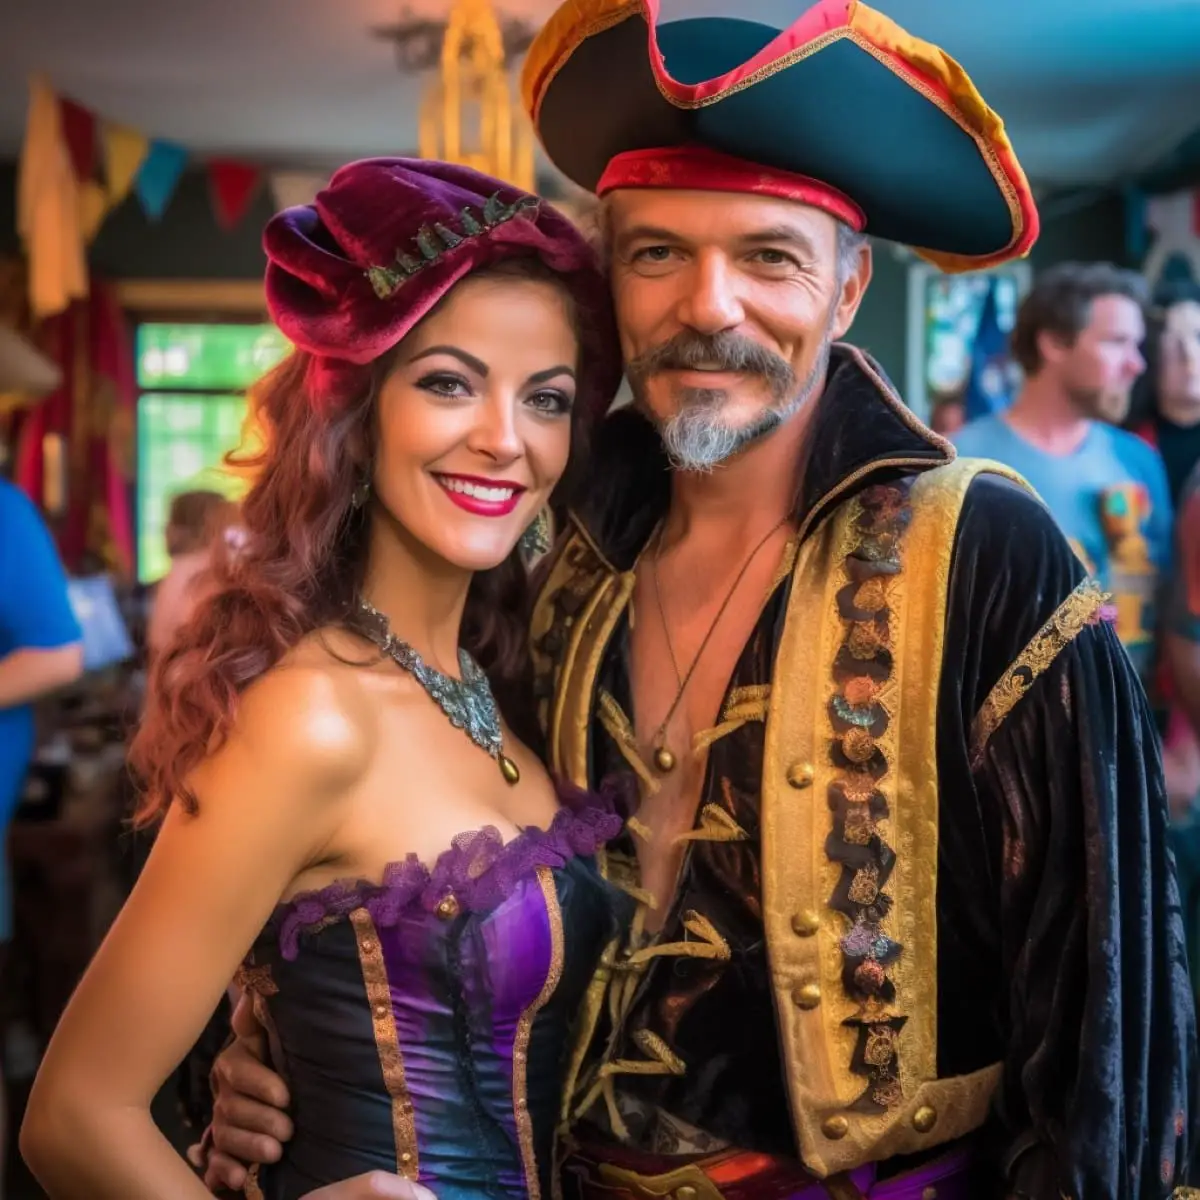 A couple at a pirate party for adults.